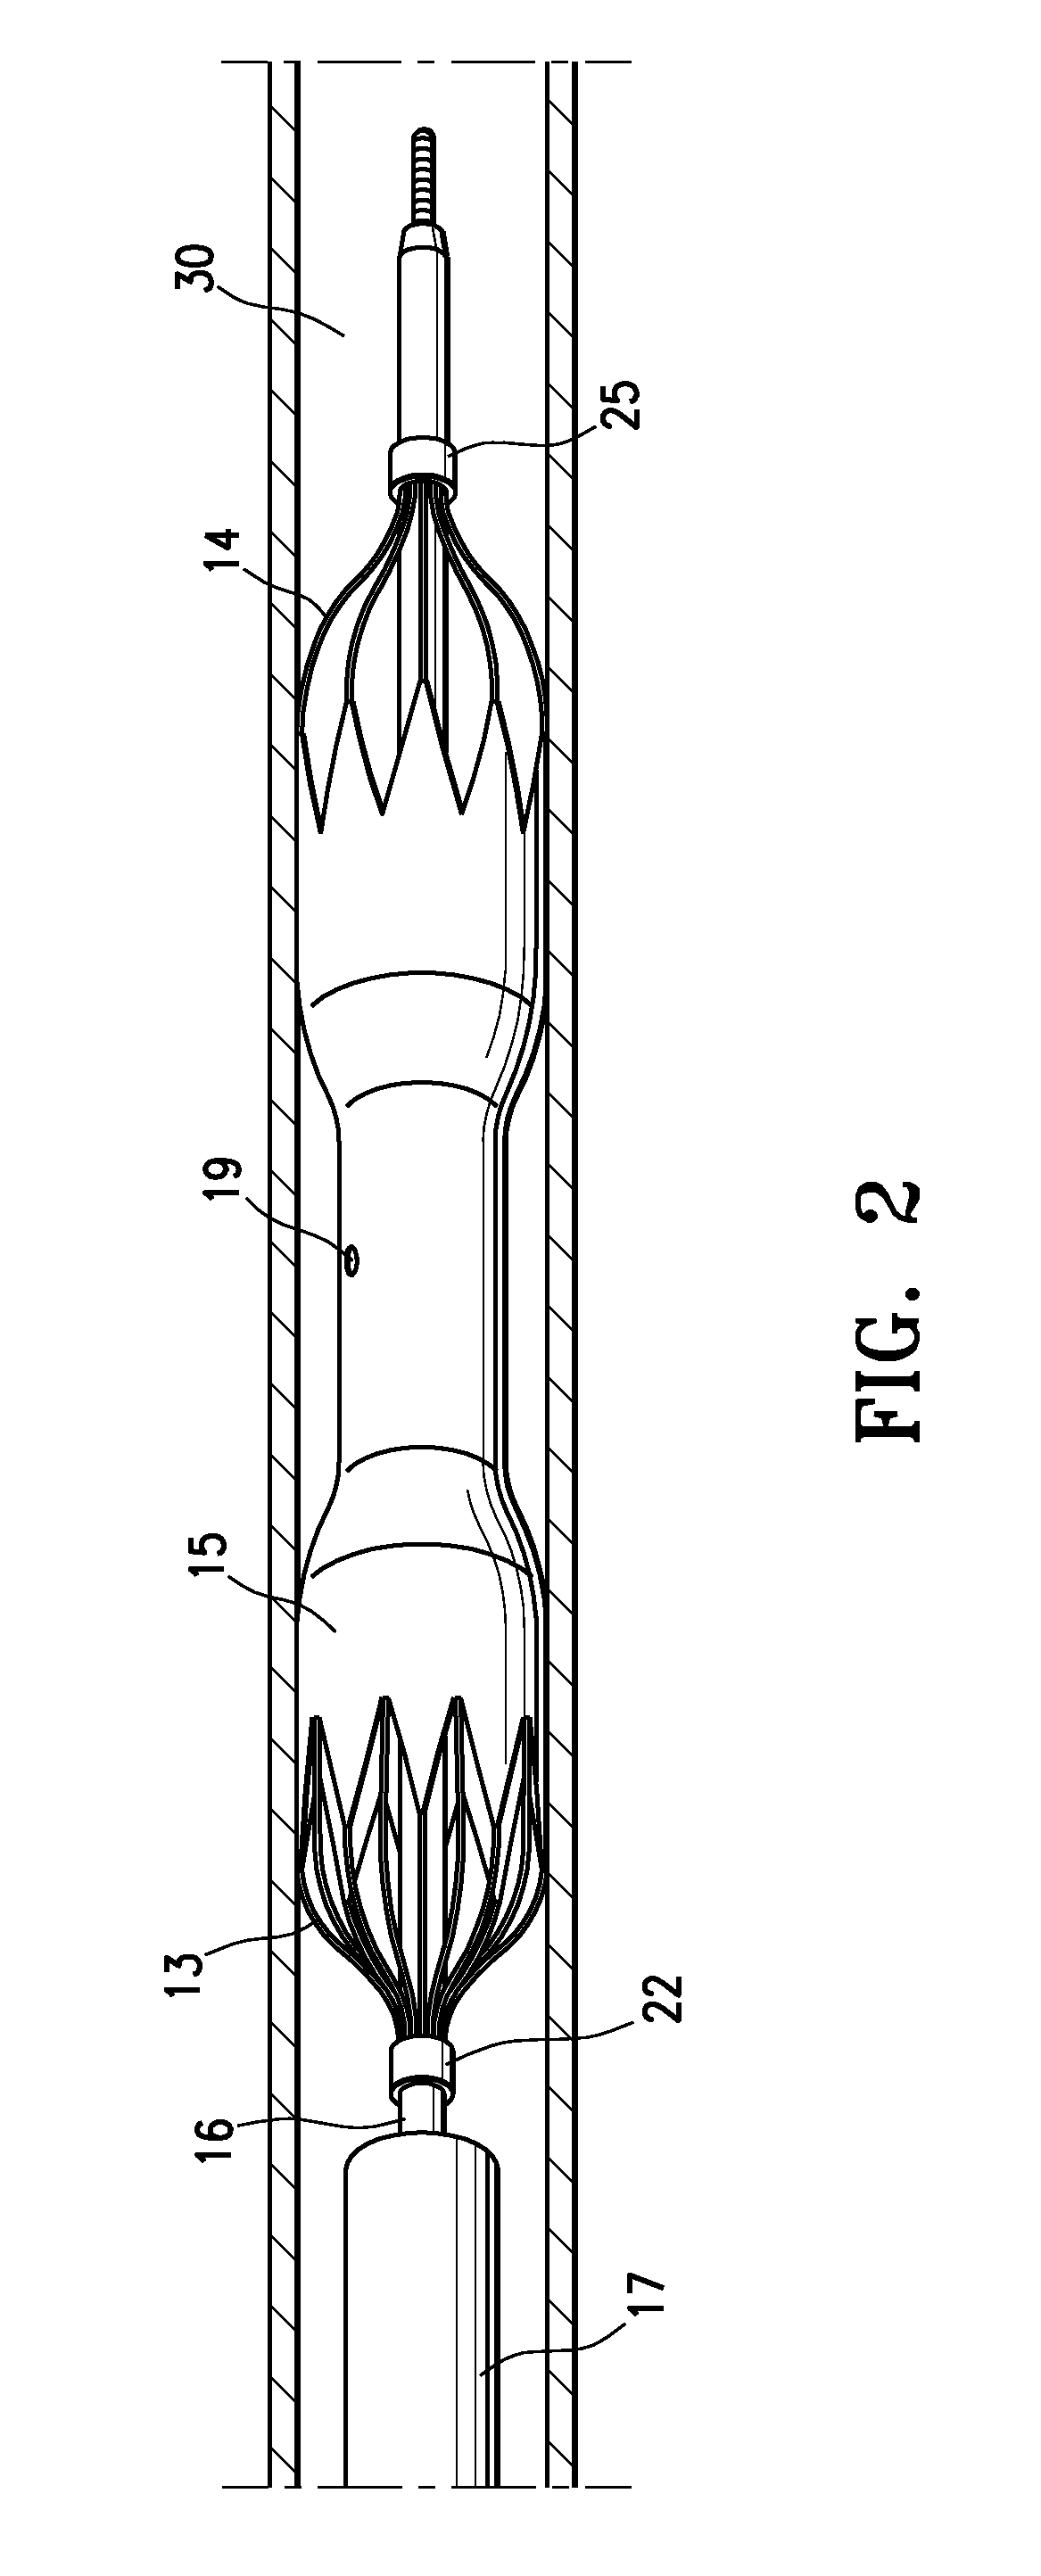 Low profile agent delivery perfusion catheter having reversibly expanding frames